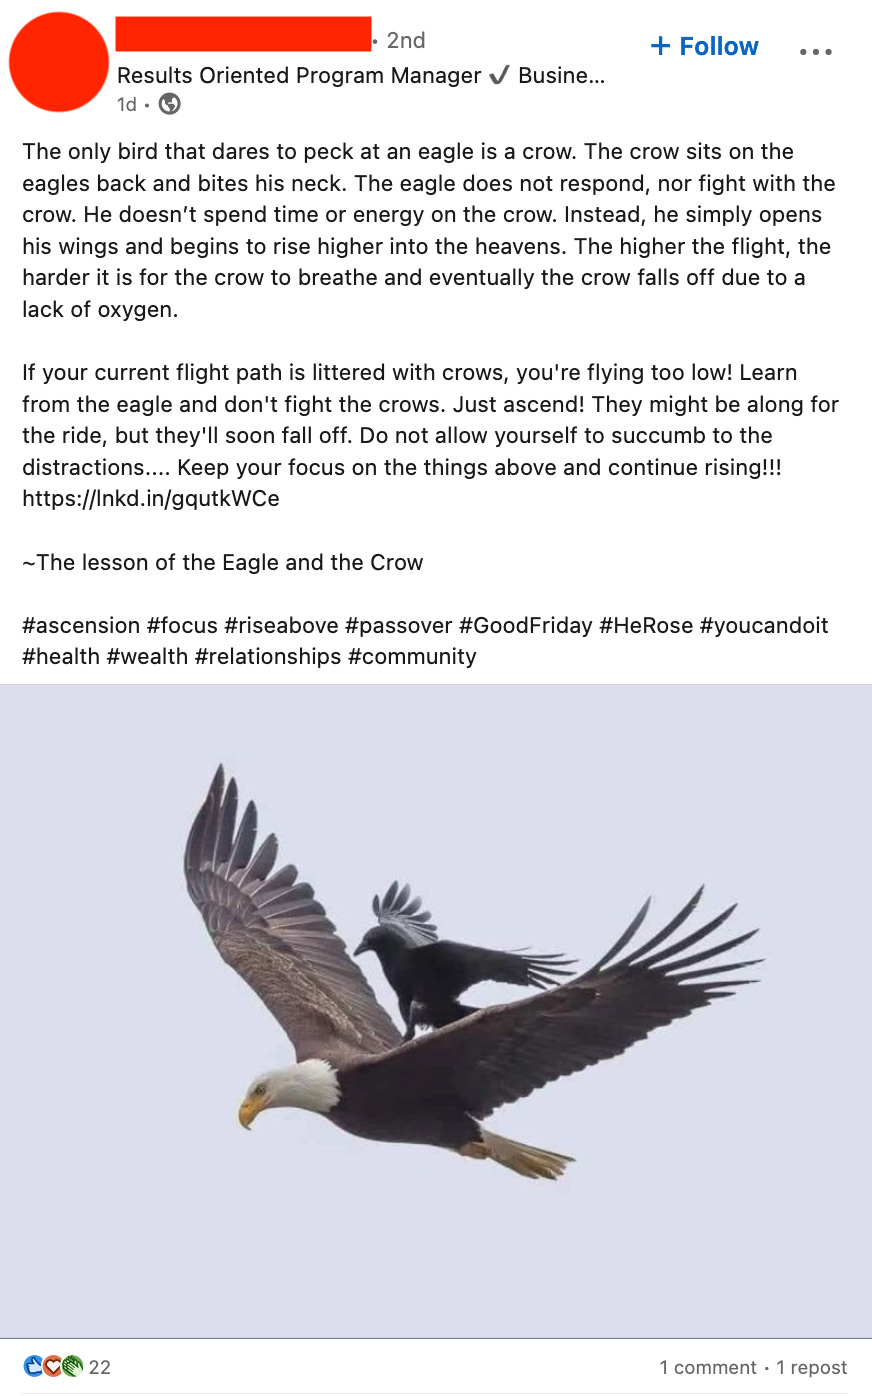 A screenshot of a LinkedIn post, with an image of an eagle attacking a crow. The text reads: The only bird that dares to peck at an eagle is a crow. The crow sits on the eagles back and bites his neck. The eagle does not respond, nor fight with the crow. He doesn’t spend time or energy on the crow. Instead, he simply opens his wings and begins to rise higher into the heavens. The higher the flight, the harder it is for the crow to breathe and eventually the crow falls off due to a lack of oxygen.  If your current flight path is littered with crows, you're flying too low! Learn from the eagle and don't fight the crows. Just ascend! They might be along for the ride, but they'll soon fall off. Do not allow yourself to succumb to the distractions.... Keep your focus on the things above and continue rising!!! https://lnkd.in/gqutkWCe  ~The lesson of the Eagle and the Crow  #ascension #focus #riseabove #passover #GoodFriday #HeRose #youcandoit #health #wealth #relationships #community 